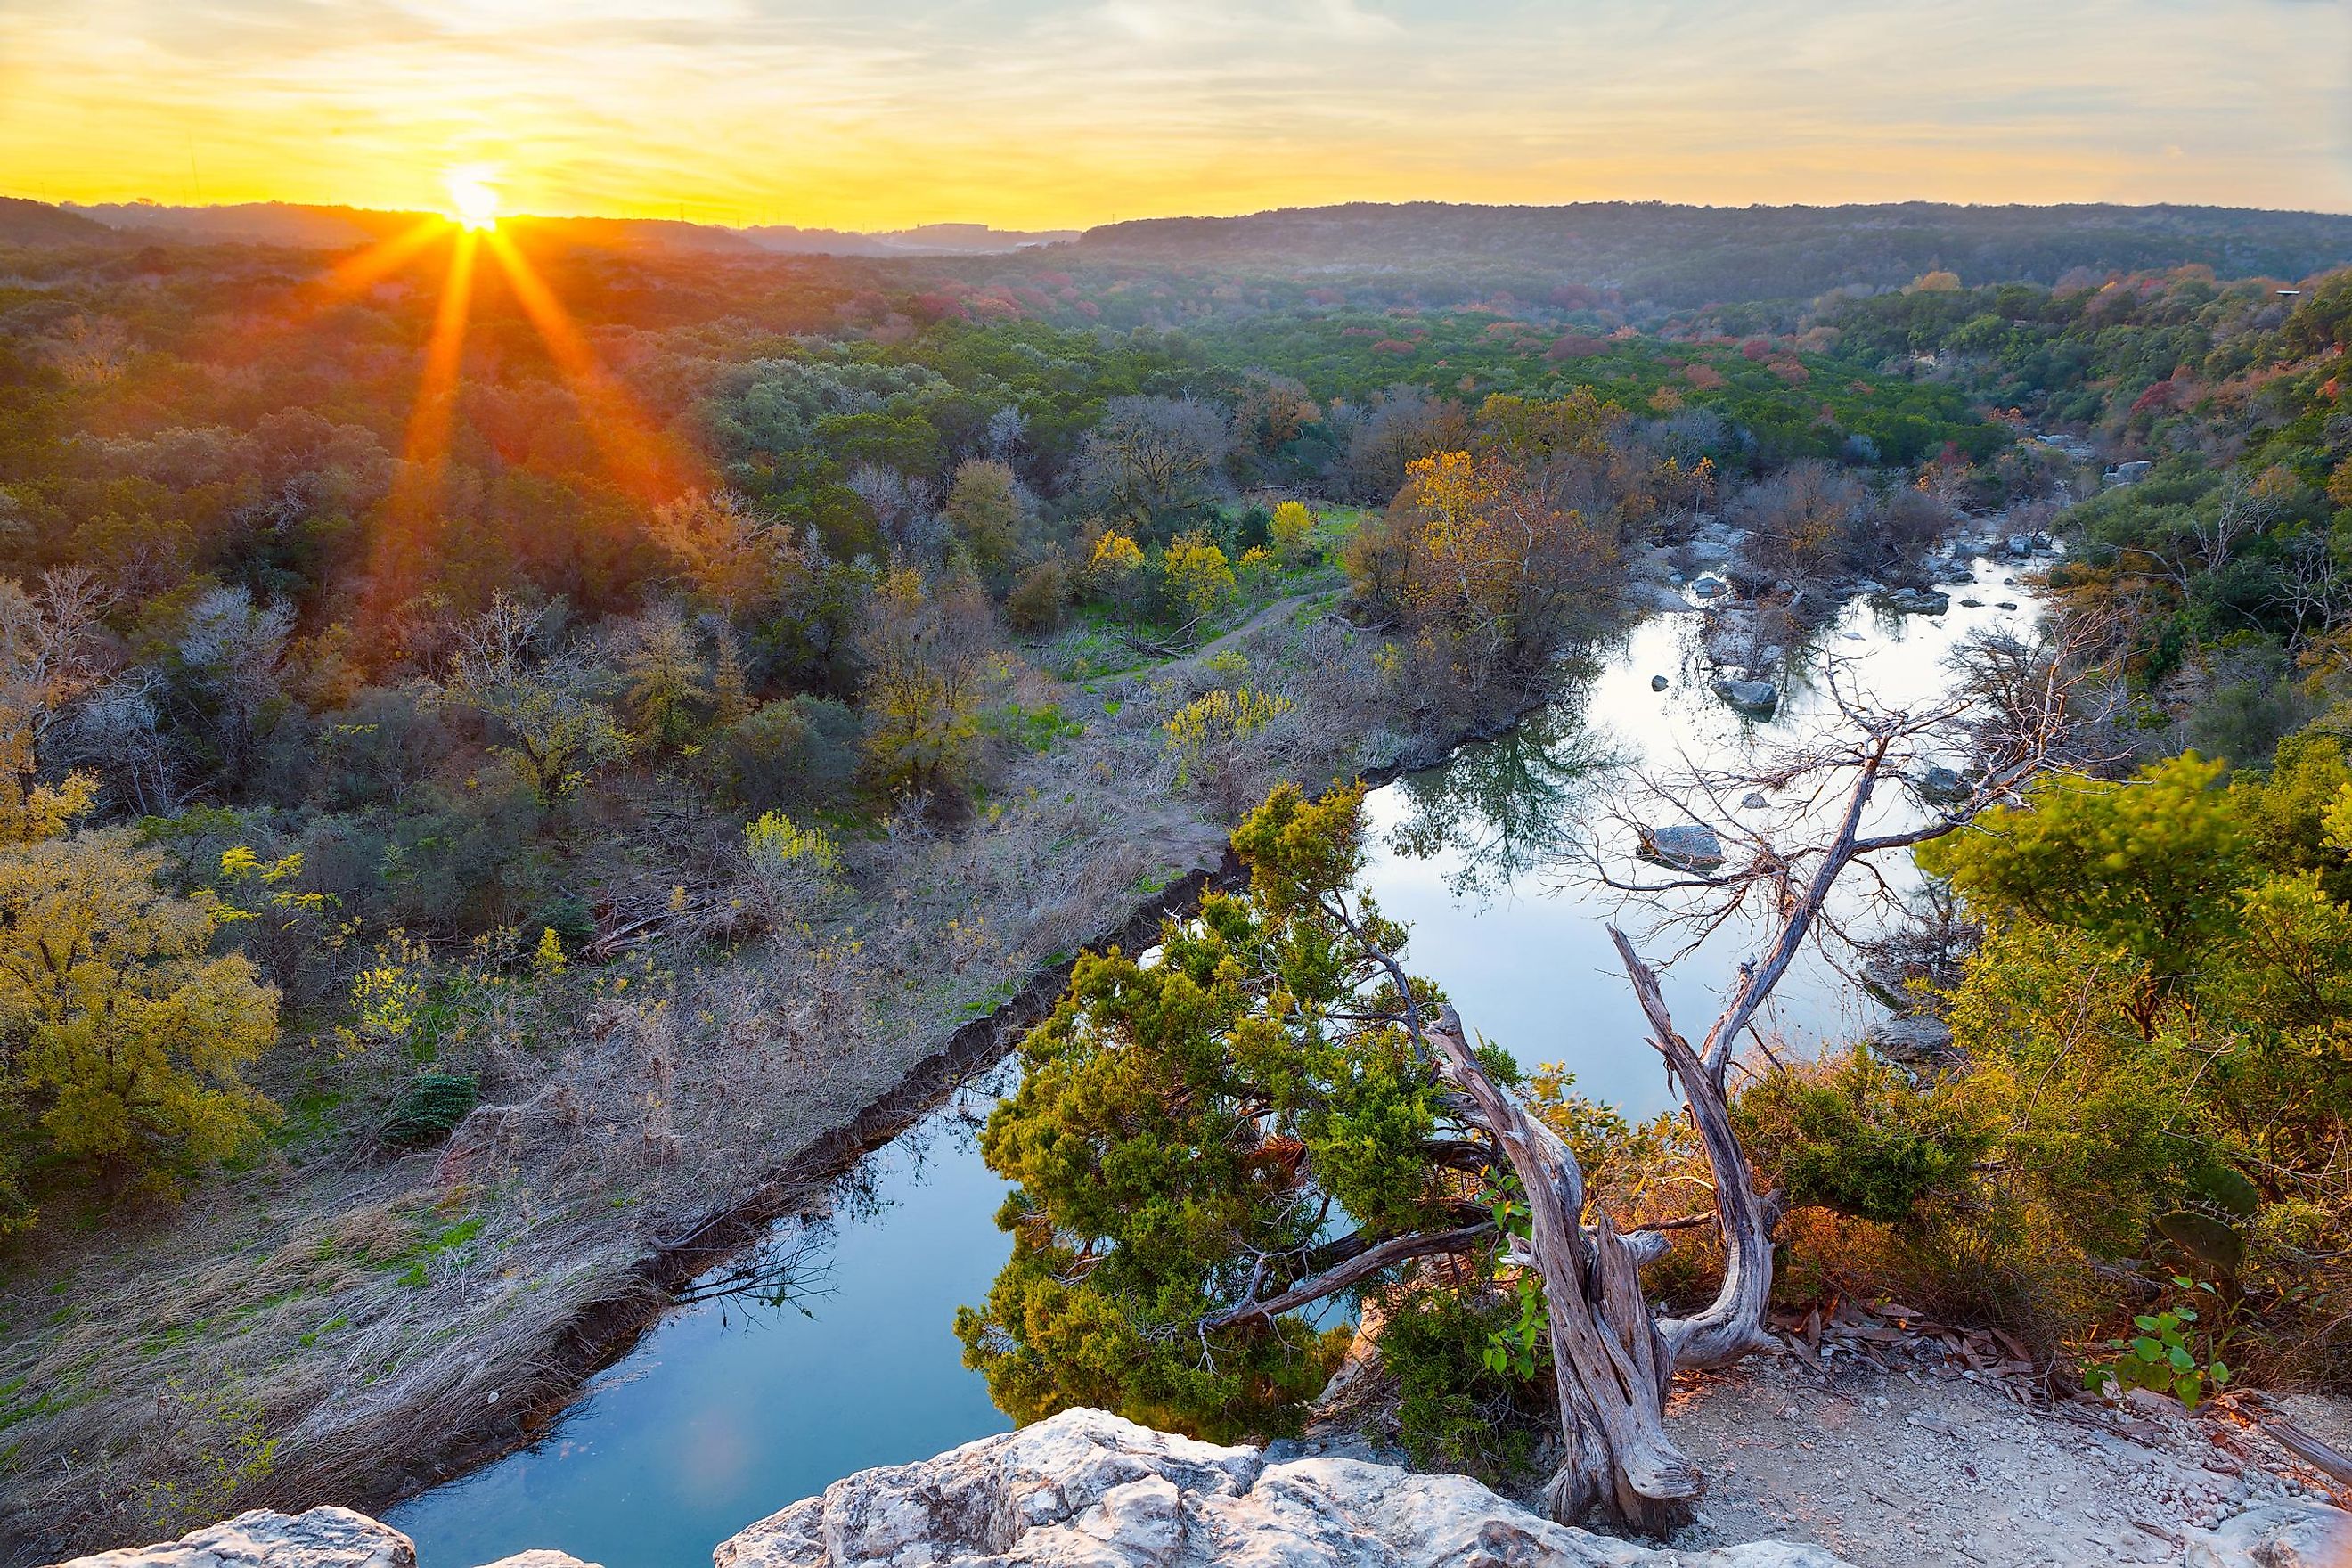 The beautiful Texas Hill Country.